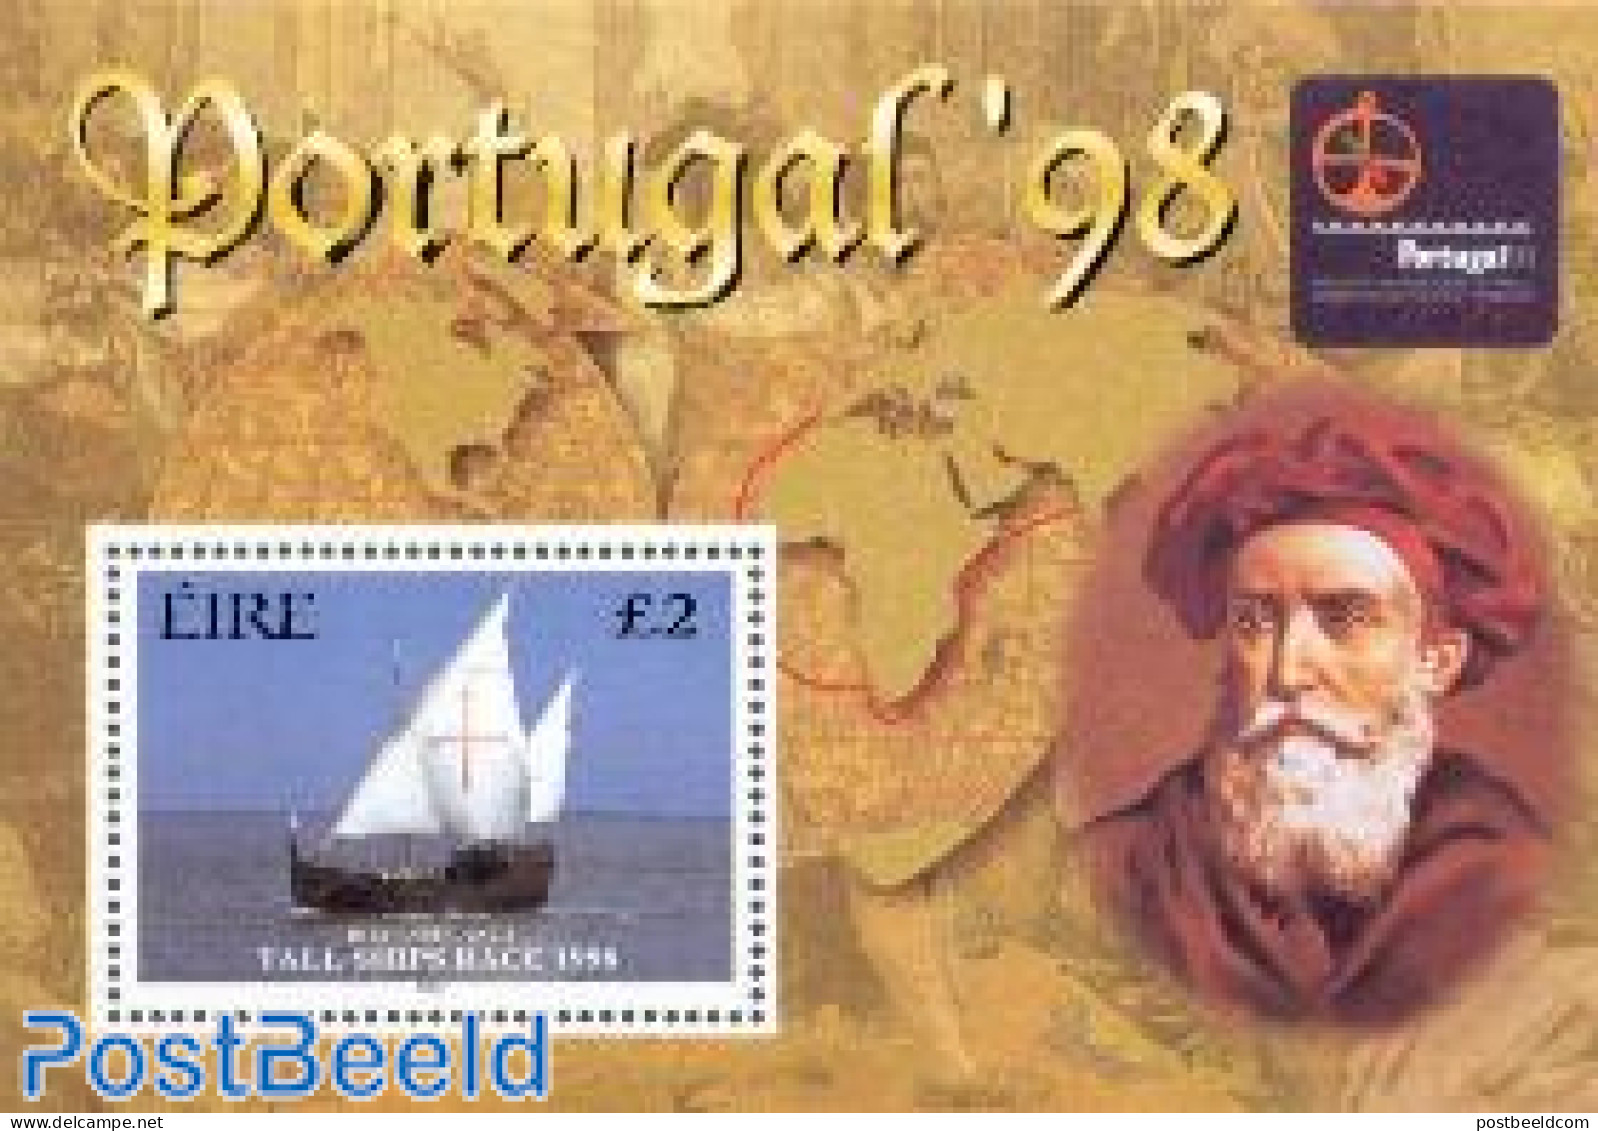 Ireland 1998 Portugal 98 S/s, Mint NH, Transport - Philately - Ships And Boats - Unused Stamps